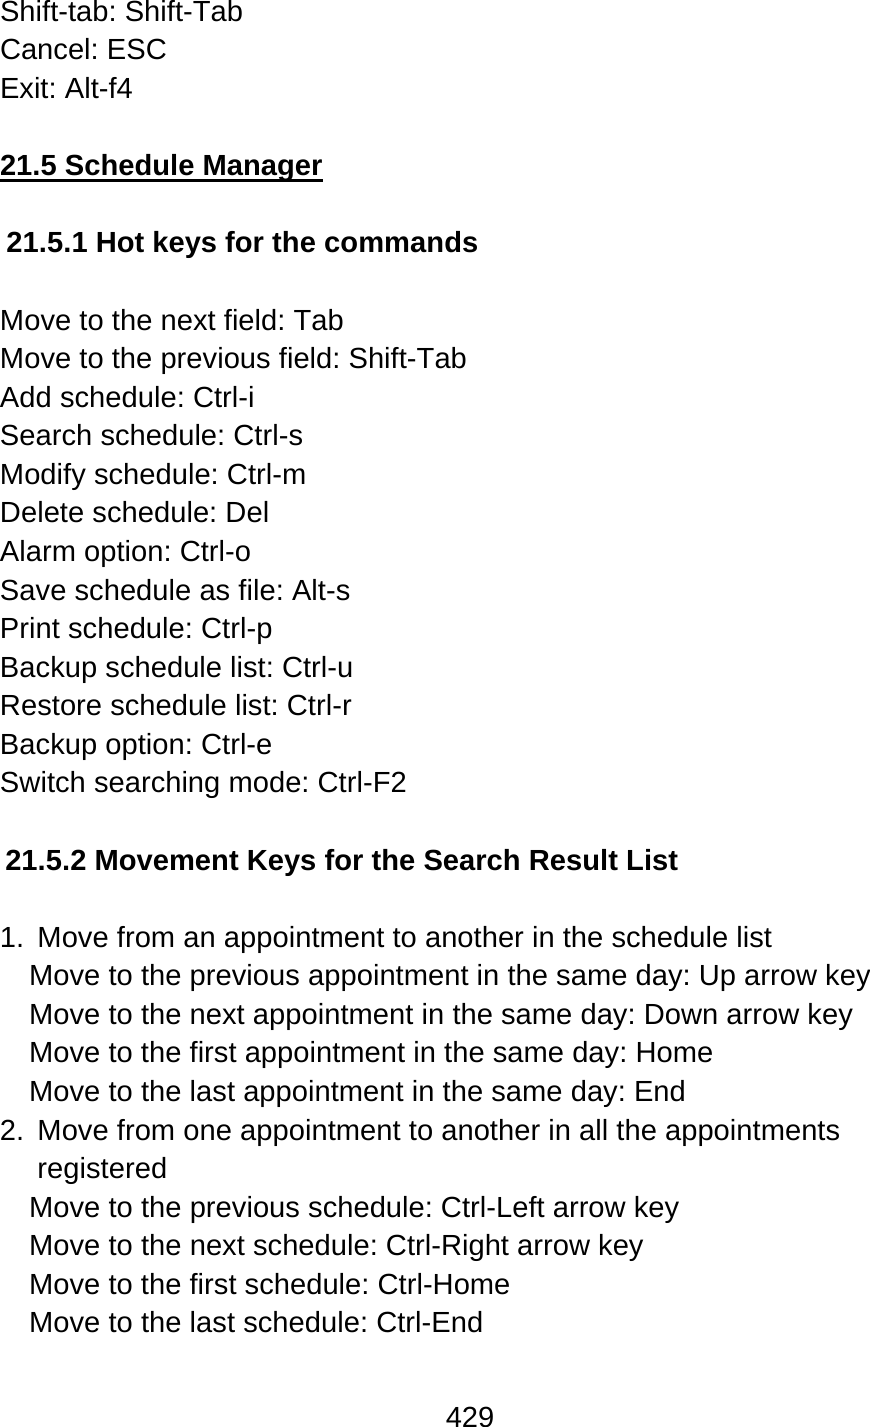 429  Shift-tab: Shift-Tab Cancel: ESC Exit: Alt-f4  21.5 Schedule Manager  21.5.1 Hot keys for the commands  Move to the next field: Tab Move to the previous field: Shift-Tab Add schedule: Ctrl-i Search schedule: Ctrl-s Modify schedule: Ctrl-m Delete schedule: Del Alarm option: Ctrl-o Save schedule as file: Alt-s Print schedule: Ctrl-p Backup schedule list: Ctrl-u Restore schedule list: Ctrl-r Backup option: Ctrl-e Switch searching mode: Ctrl-F2    21.5.2 Movement Keys for the Search Result List  1.  Move from an appointment to another in the schedule list Move to the previous appointment in the same day: Up arrow key Move to the next appointment in the same day: Down arrow key Move to the first appointment in the same day: Home Move to the last appointment in the same day: End 2.  Move from one appointment to another in all the appointments registered Move to the previous schedule: Ctrl-Left arrow key Move to the next schedule: Ctrl-Right arrow key Move to the first schedule: Ctrl-Home Move to the last schedule: Ctrl-End  